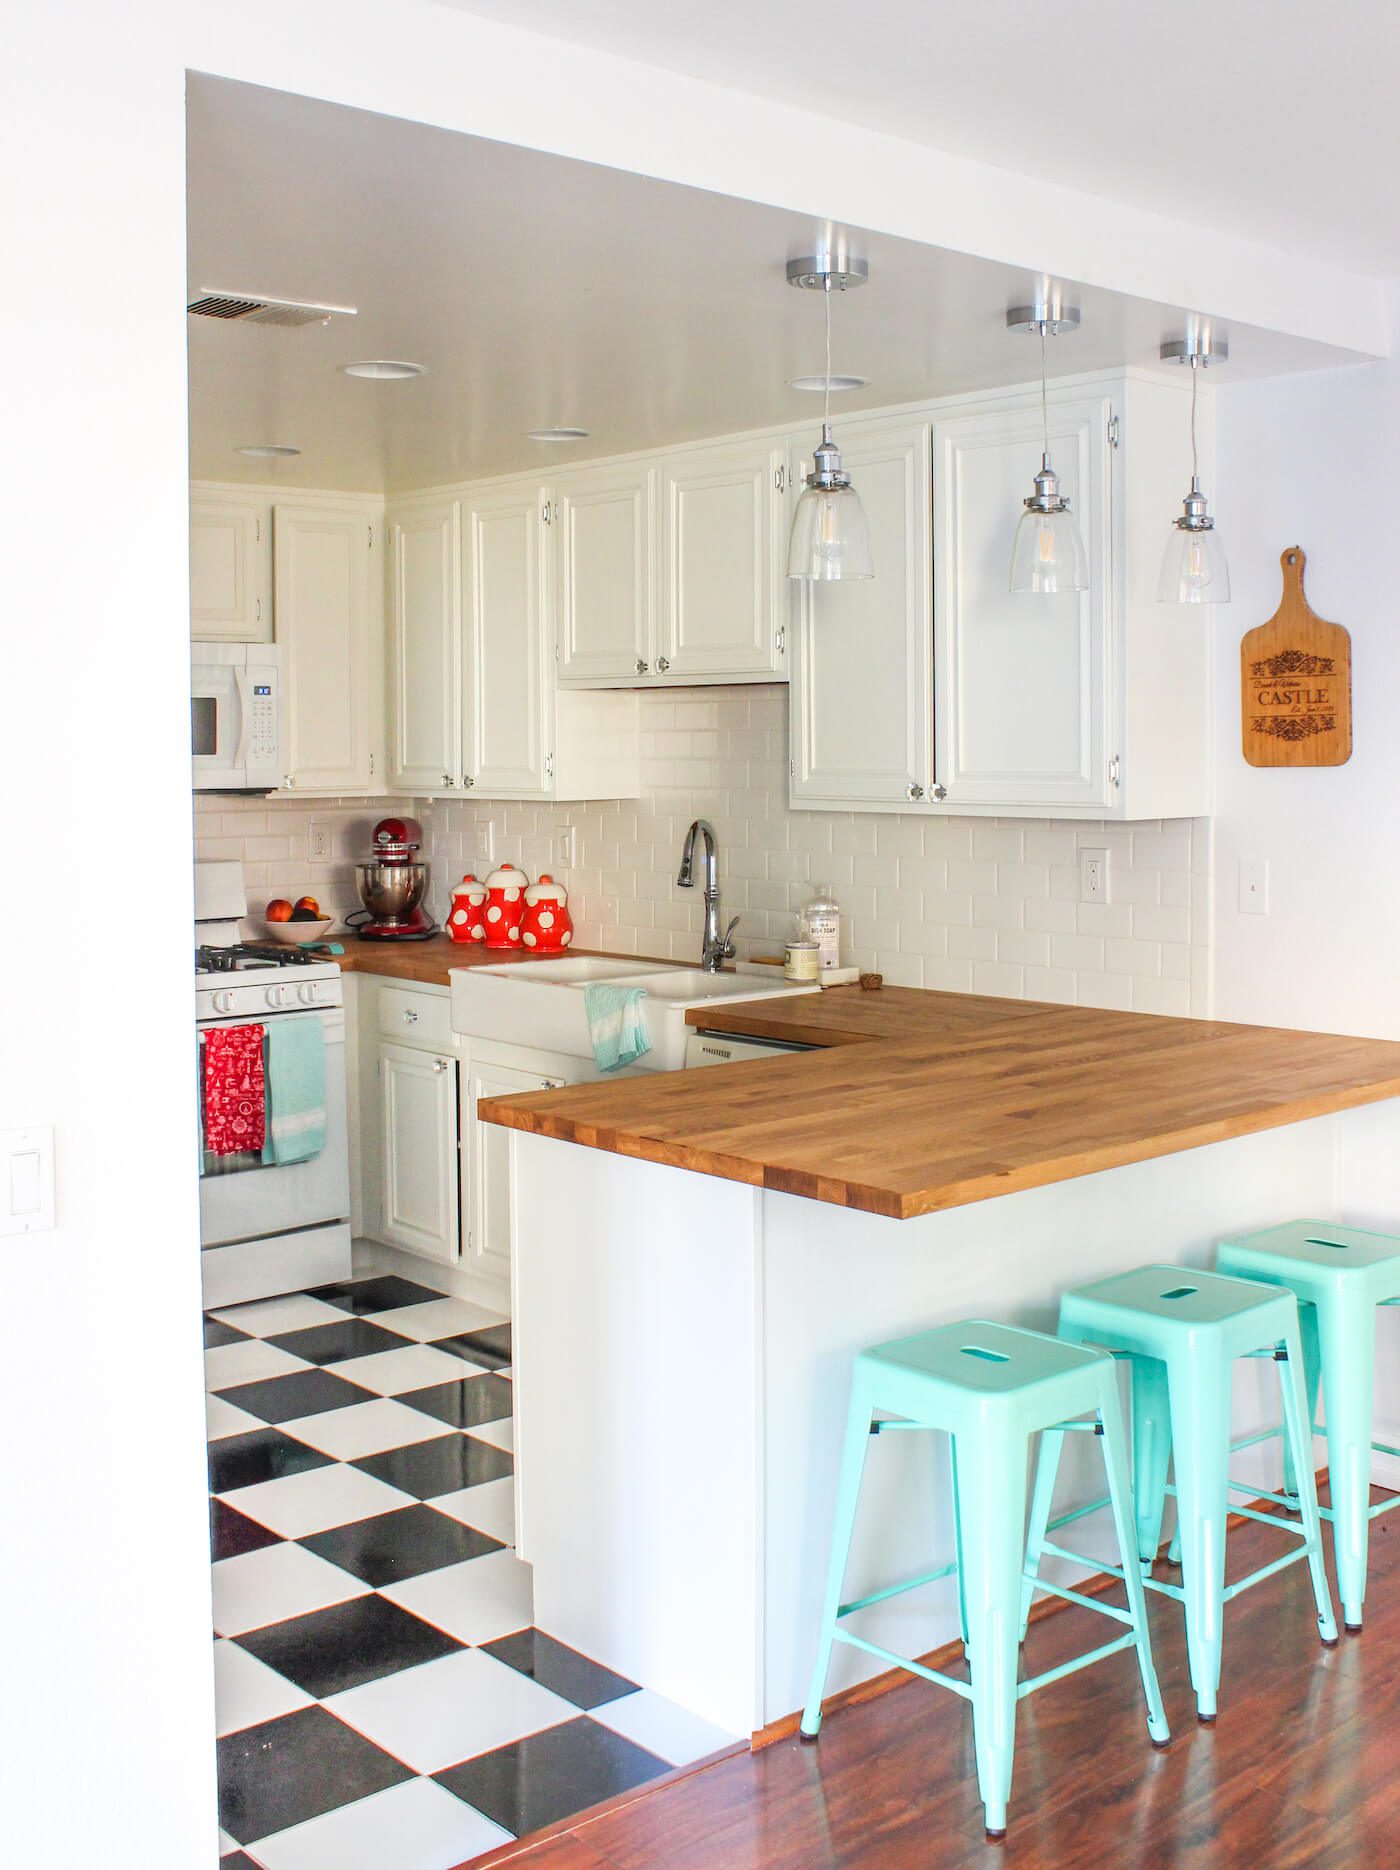 Repaint kitchen cabinets to white with farmhouse style